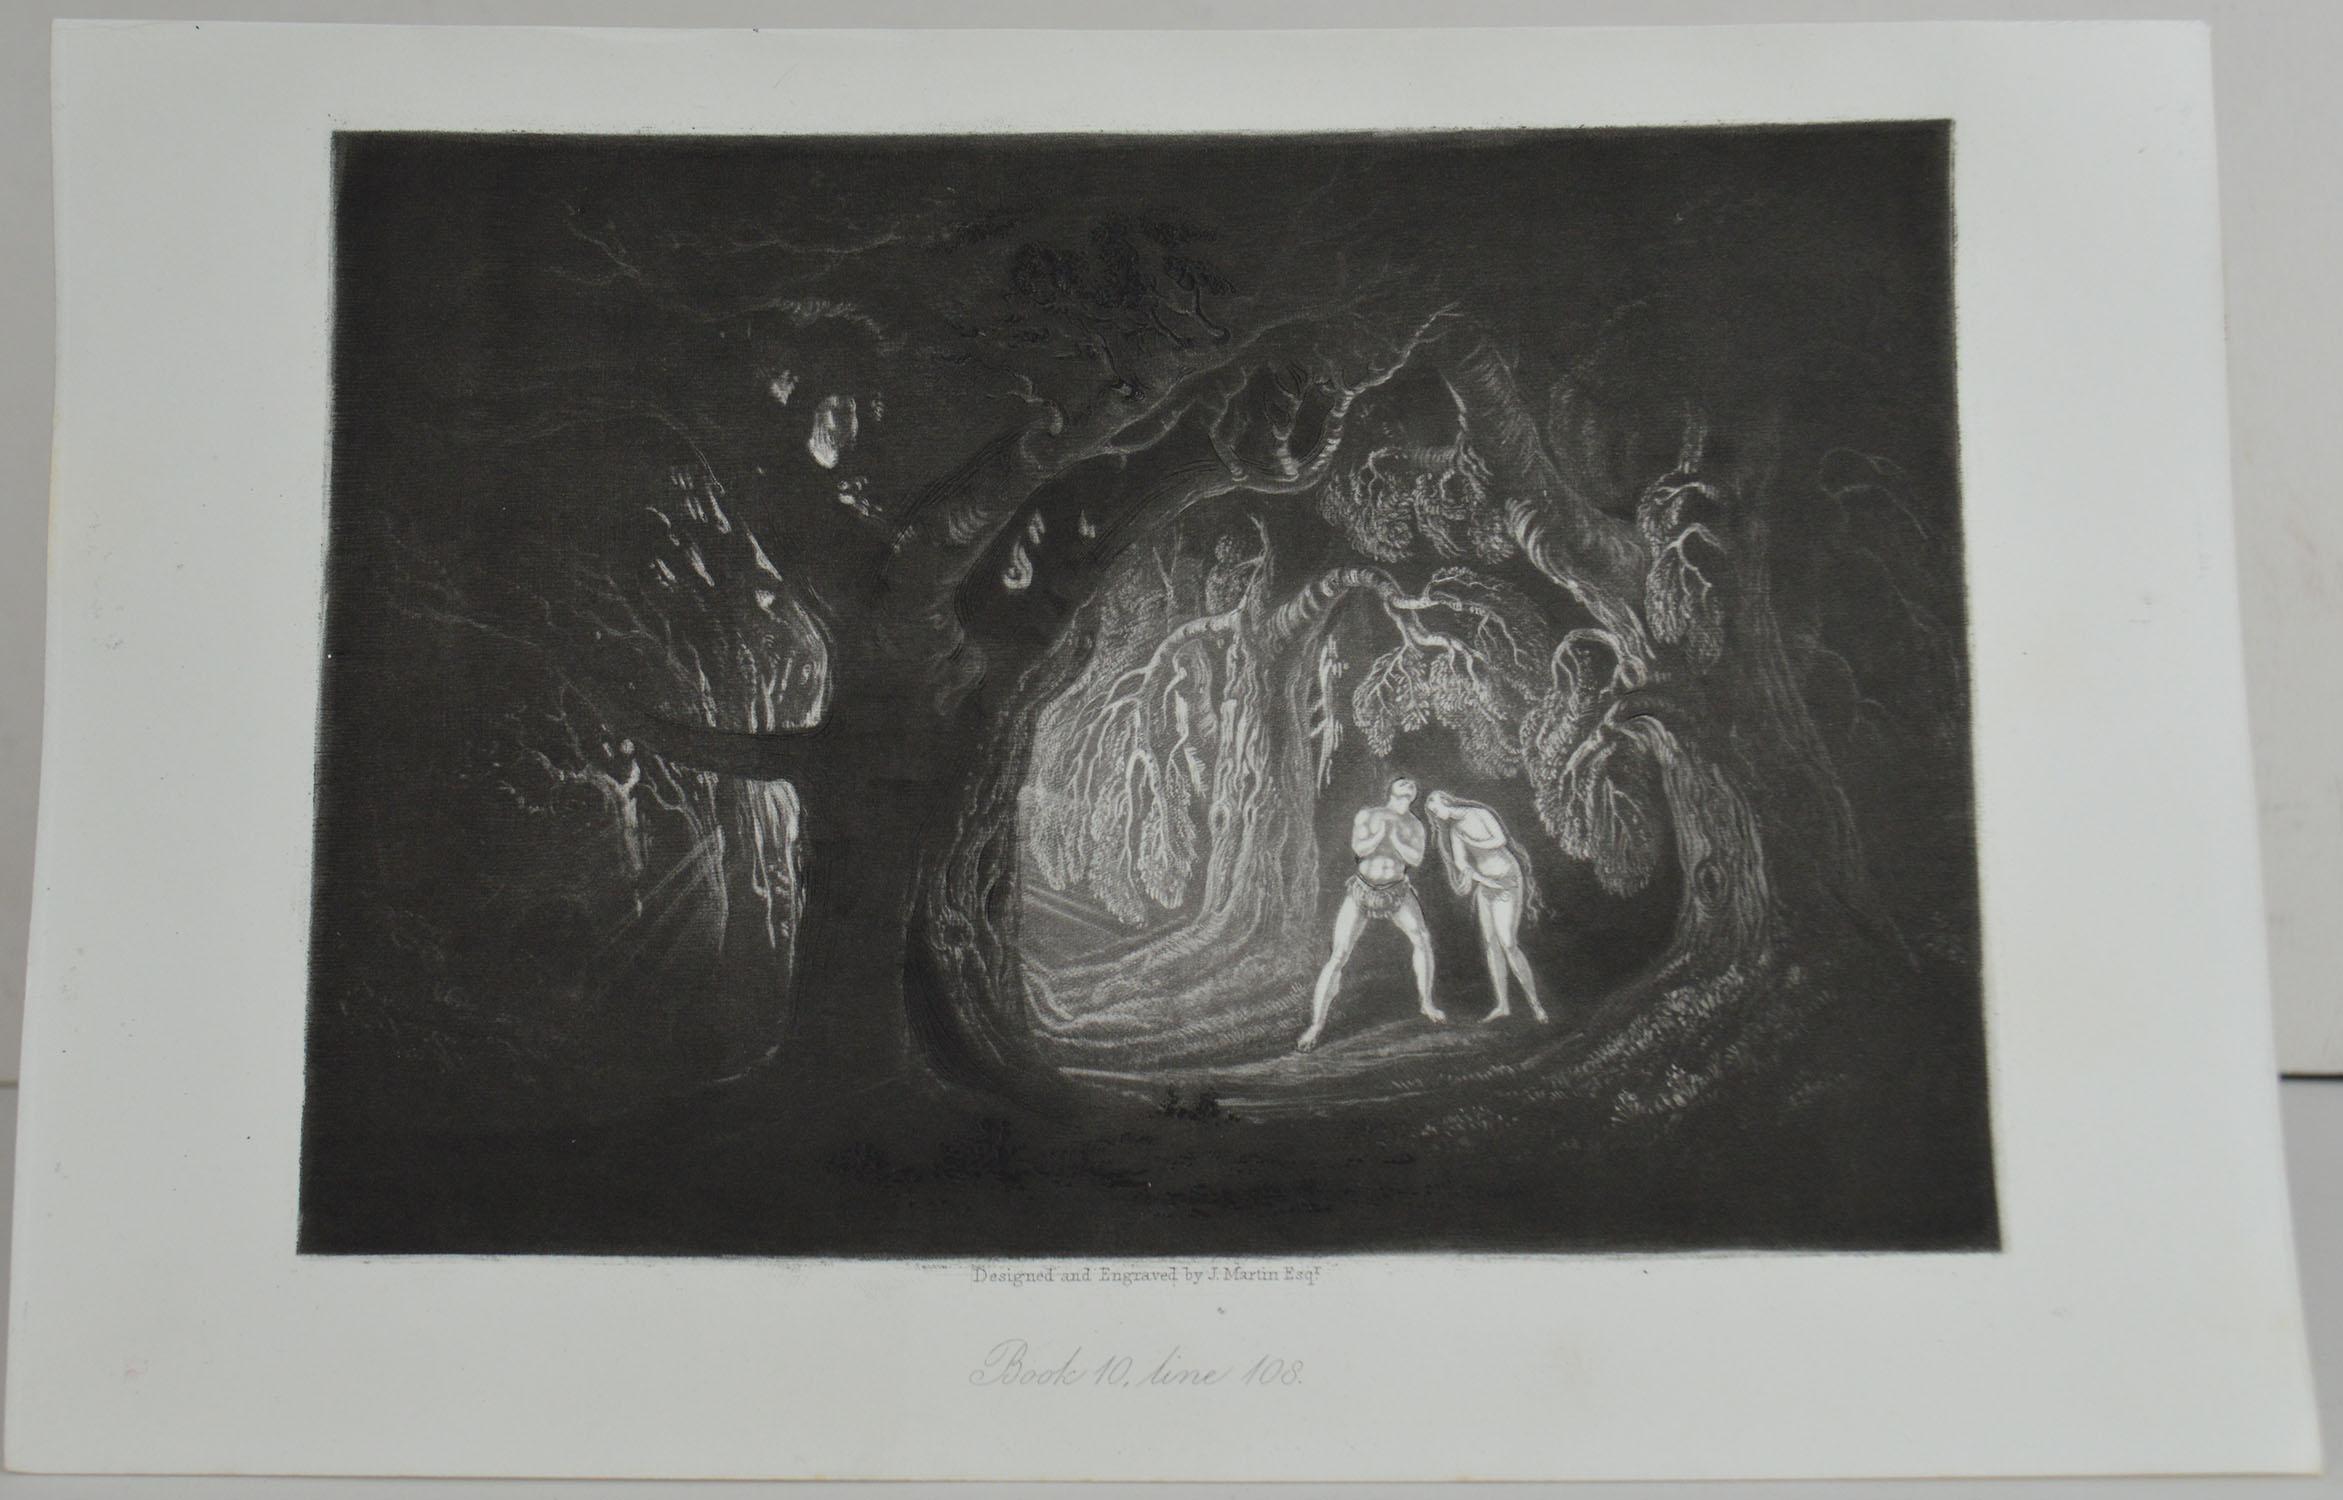 Sensational image by John Martin.

Titled: Adam Hearing the Voice of the Almighty

Drawn and engraved by John Martin. From the highly regarded Washbourne Publication of Milton's Paradise Lost, 1853.

Unframed.
 
 